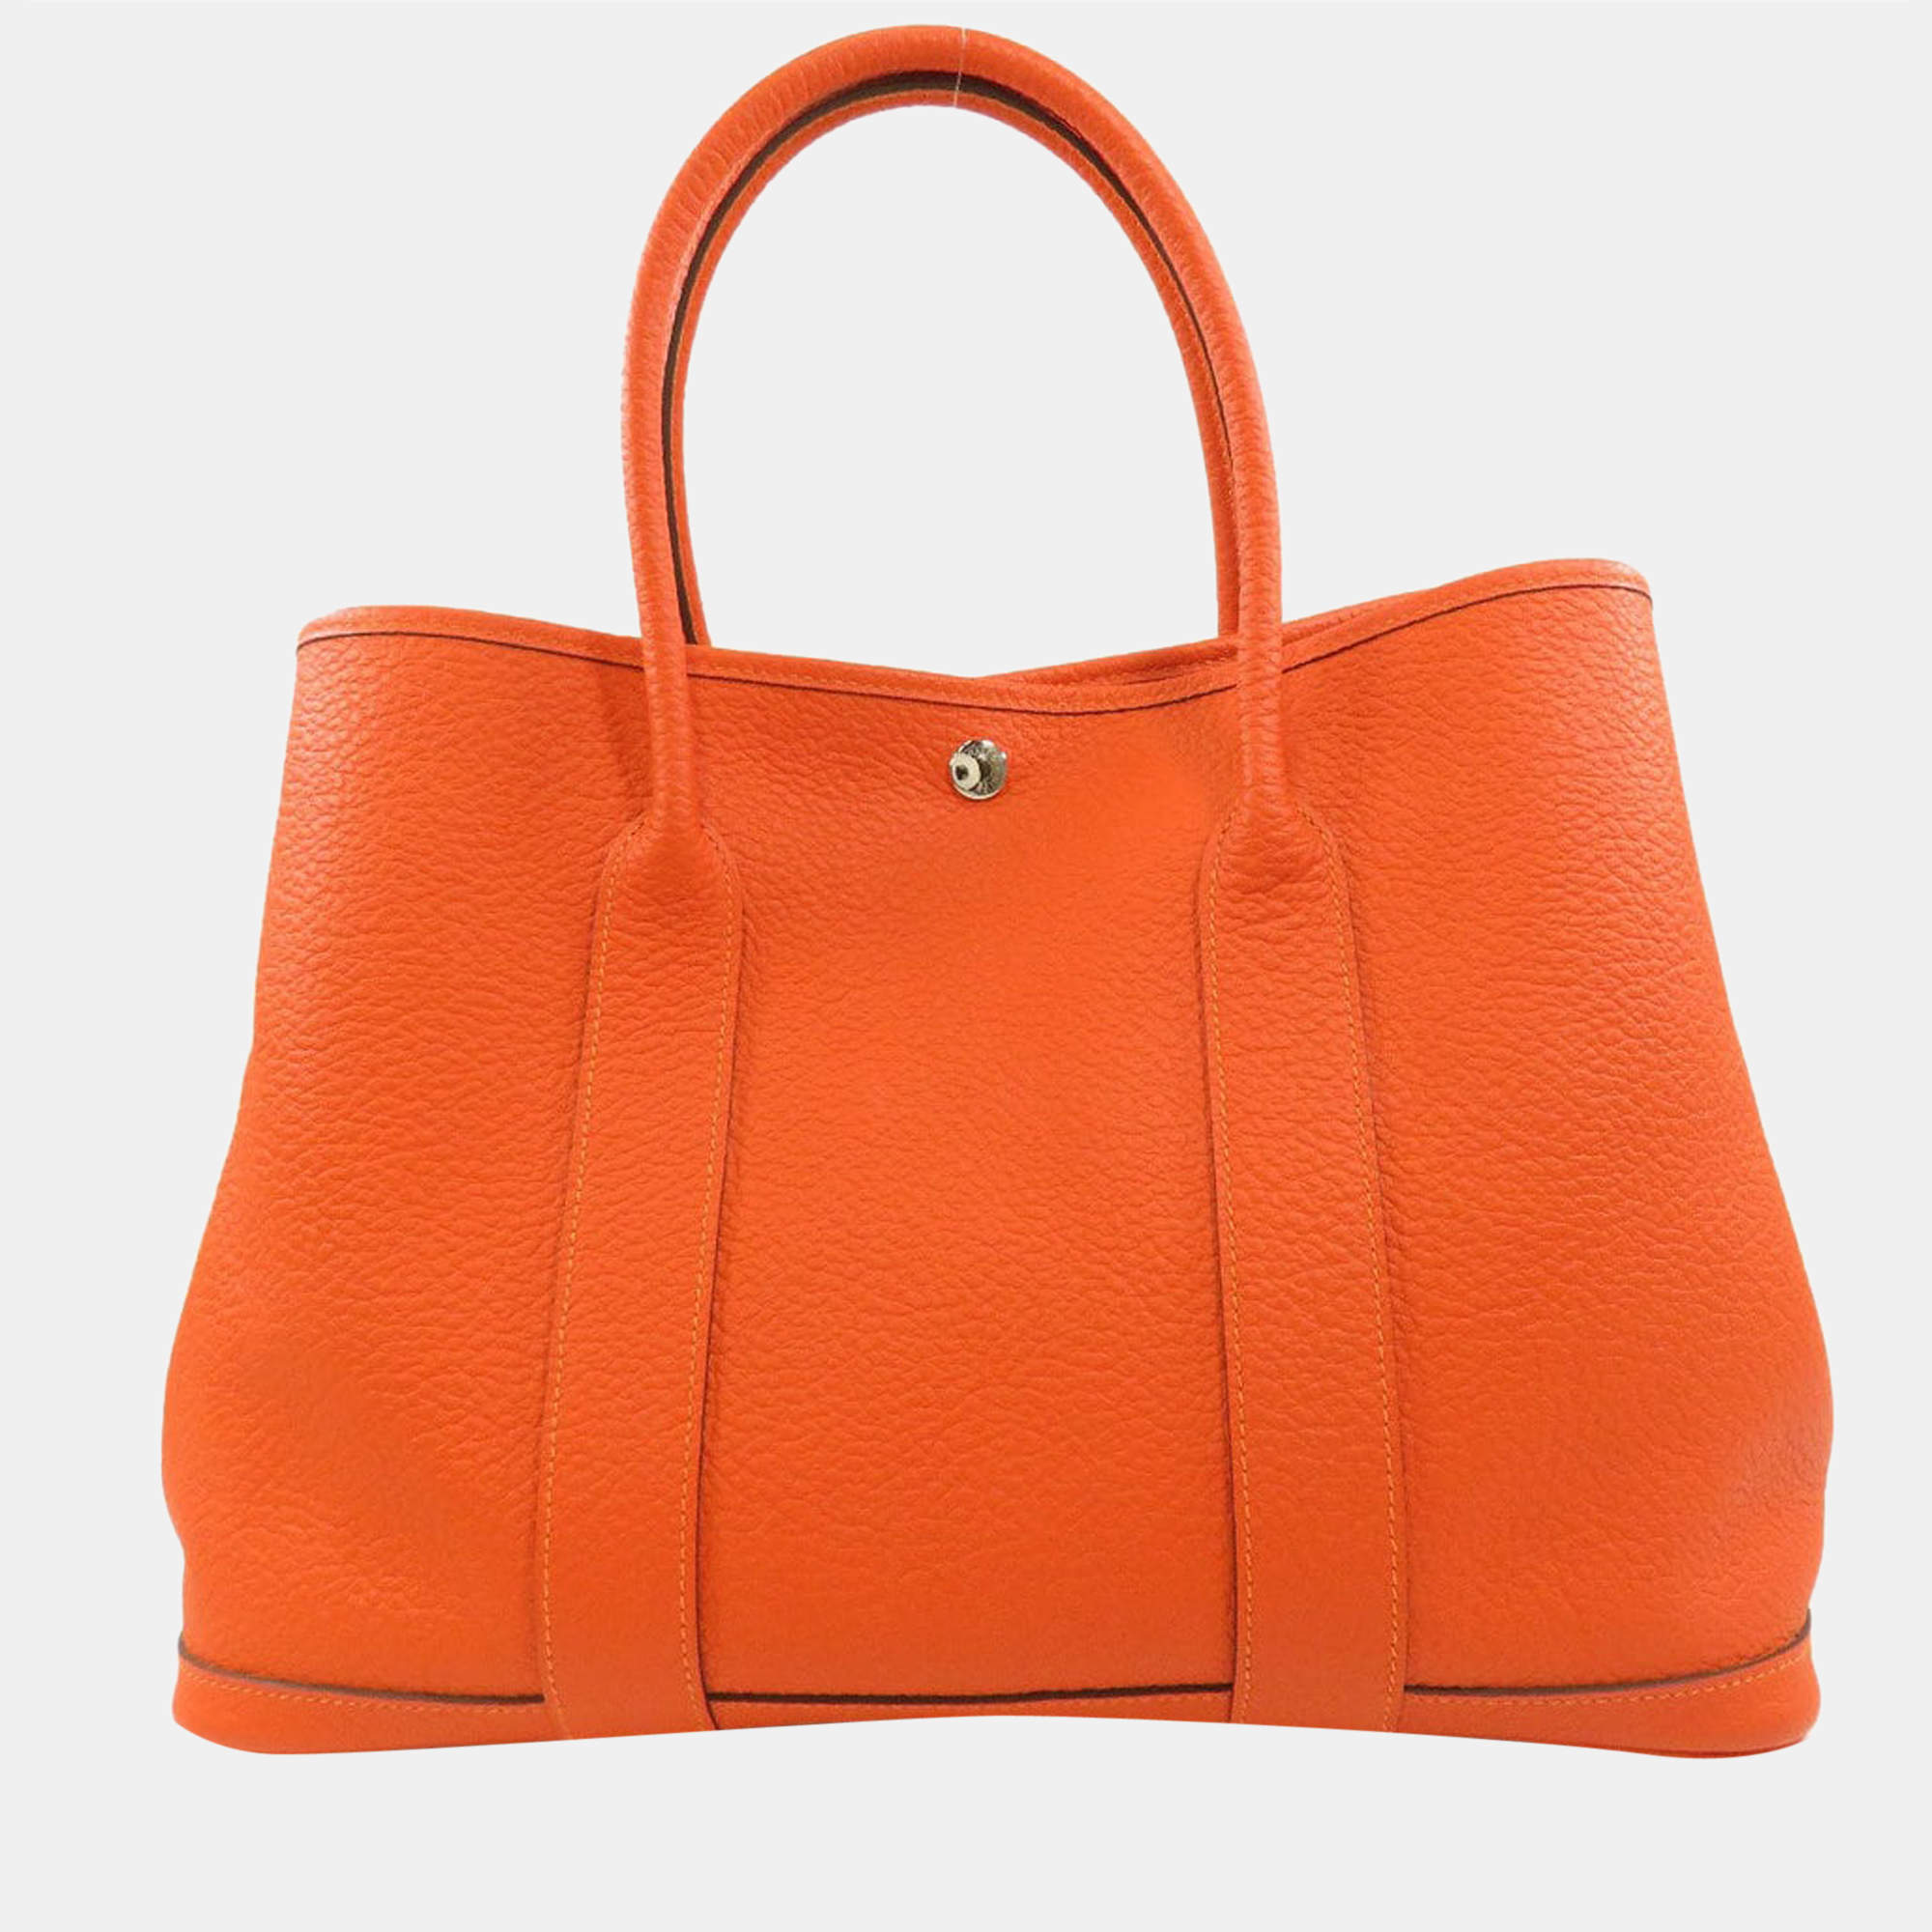 HERMES GARDEN PARTY PM Country leather Sanguine X Engraving Tote